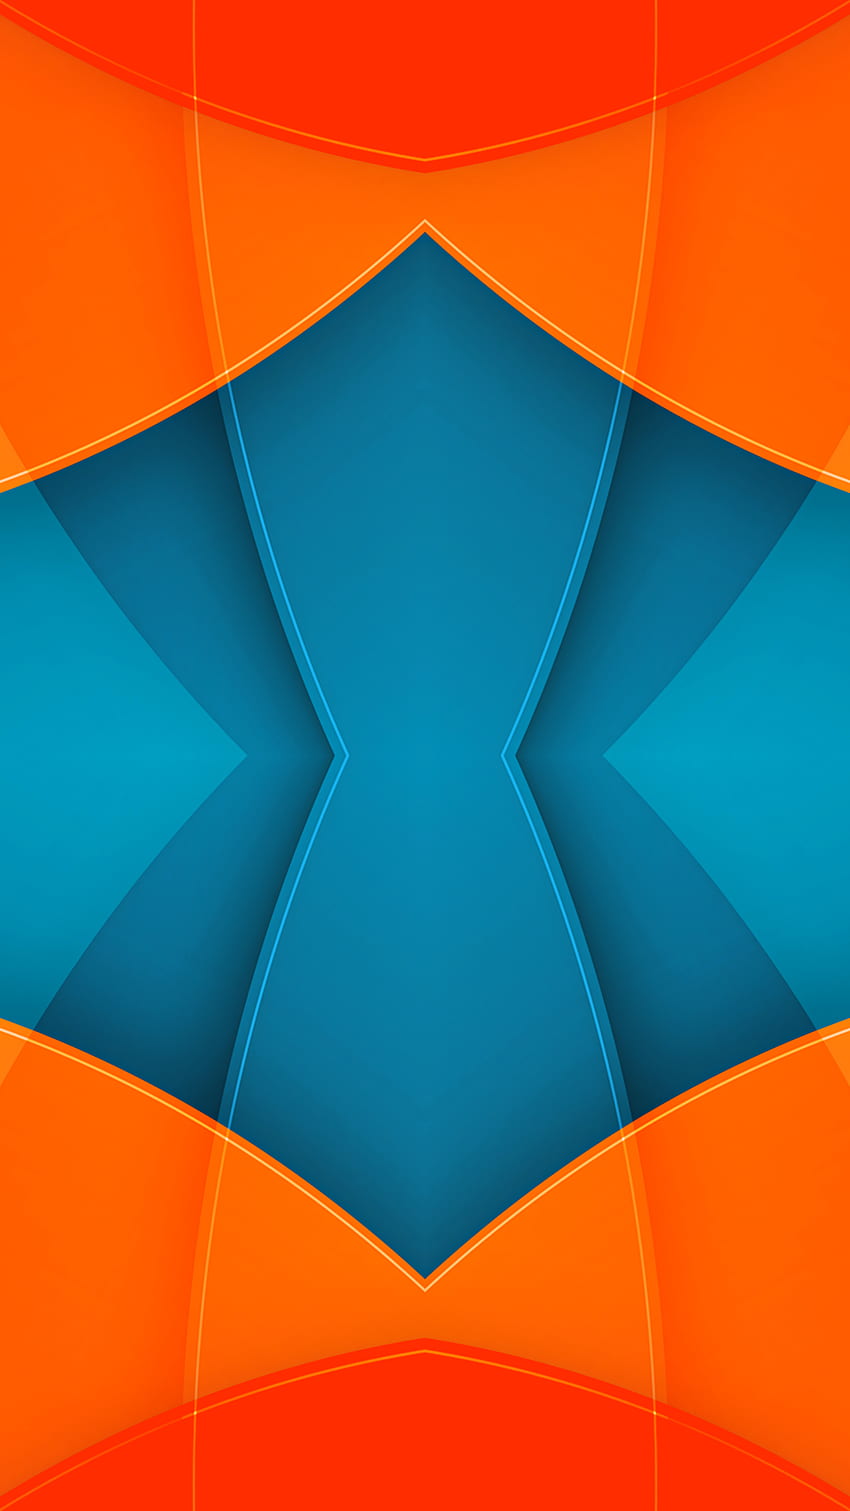 dsdsa, orange, new, blue, material, shadow, shapes, texture, design, geometric, pattern, abstract HD phone wallpaper